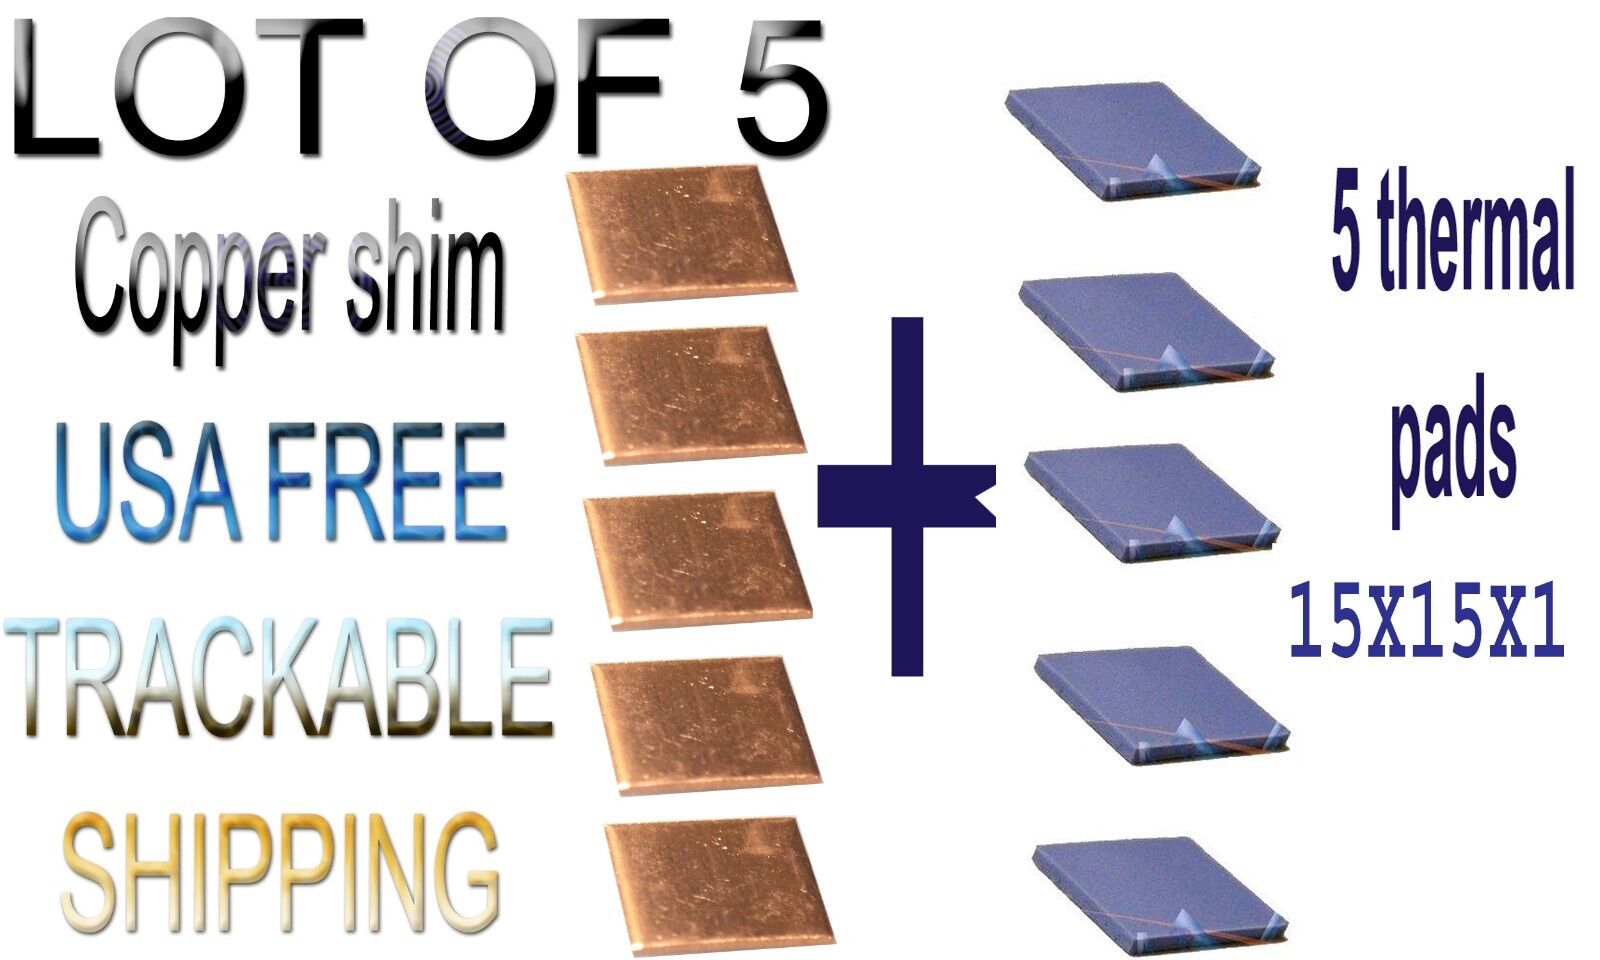 LOT OF 5 PIECES FAT COPPER SHIMS + 5 thermal silicone pads / GPU CPU Fix